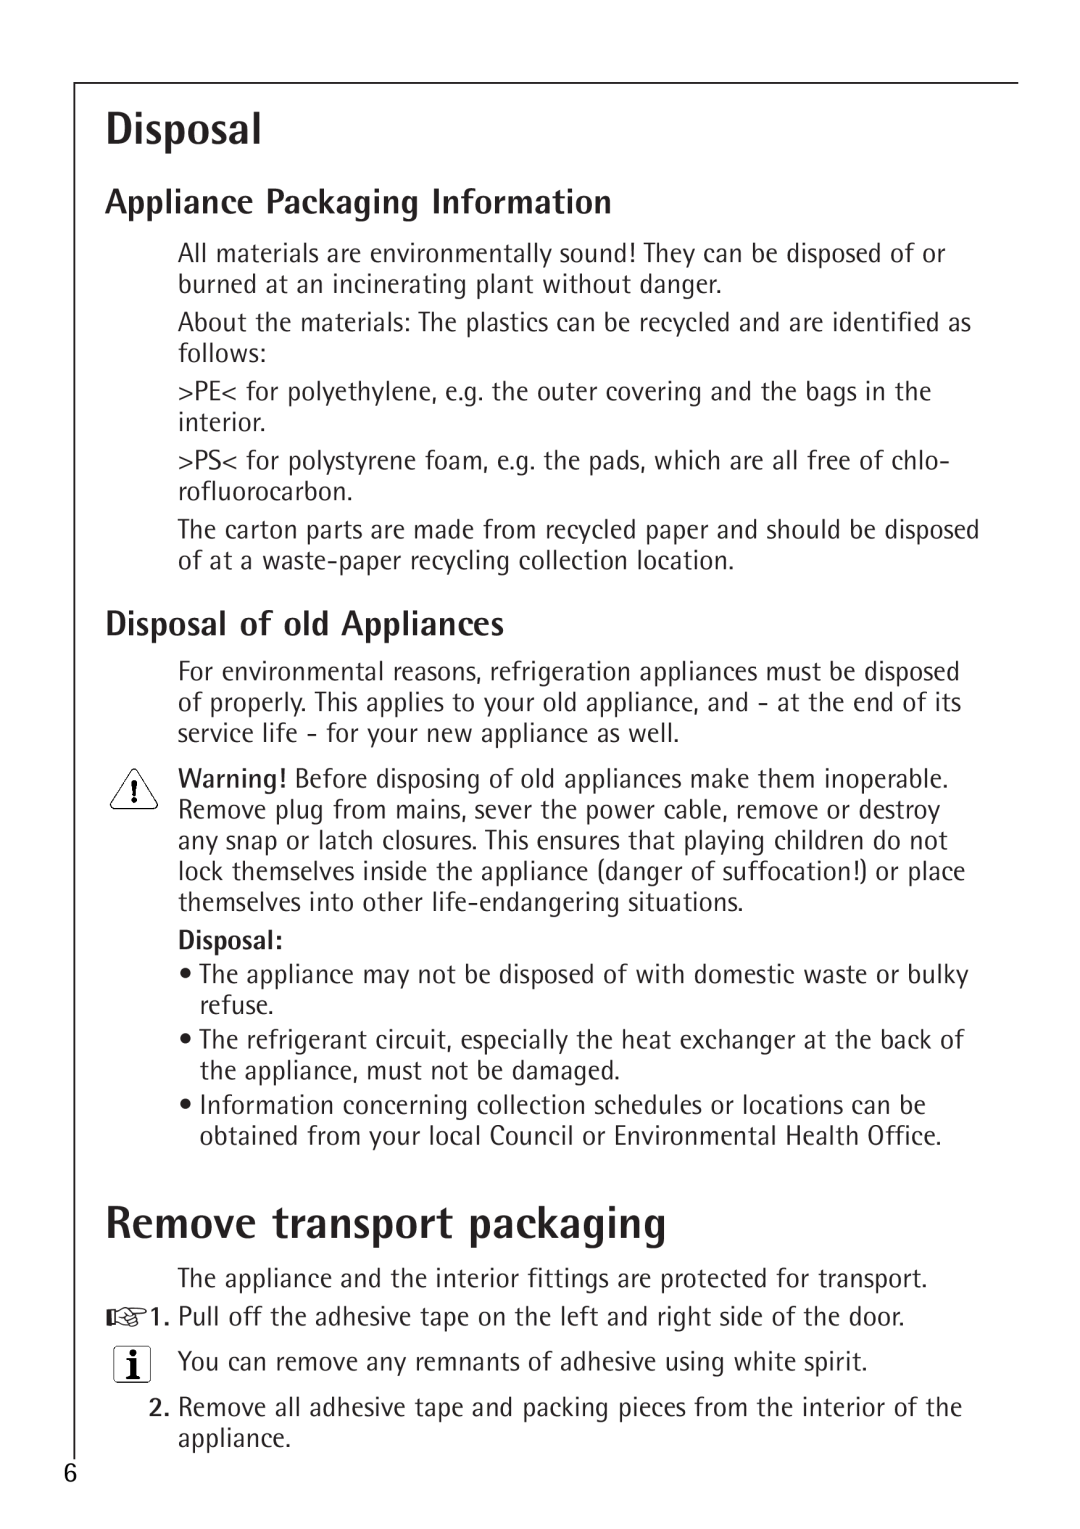 Electrolux SANTO U 86040 i installation instructions Disposal, Remove transport packaging, Appliance Packaging Information 